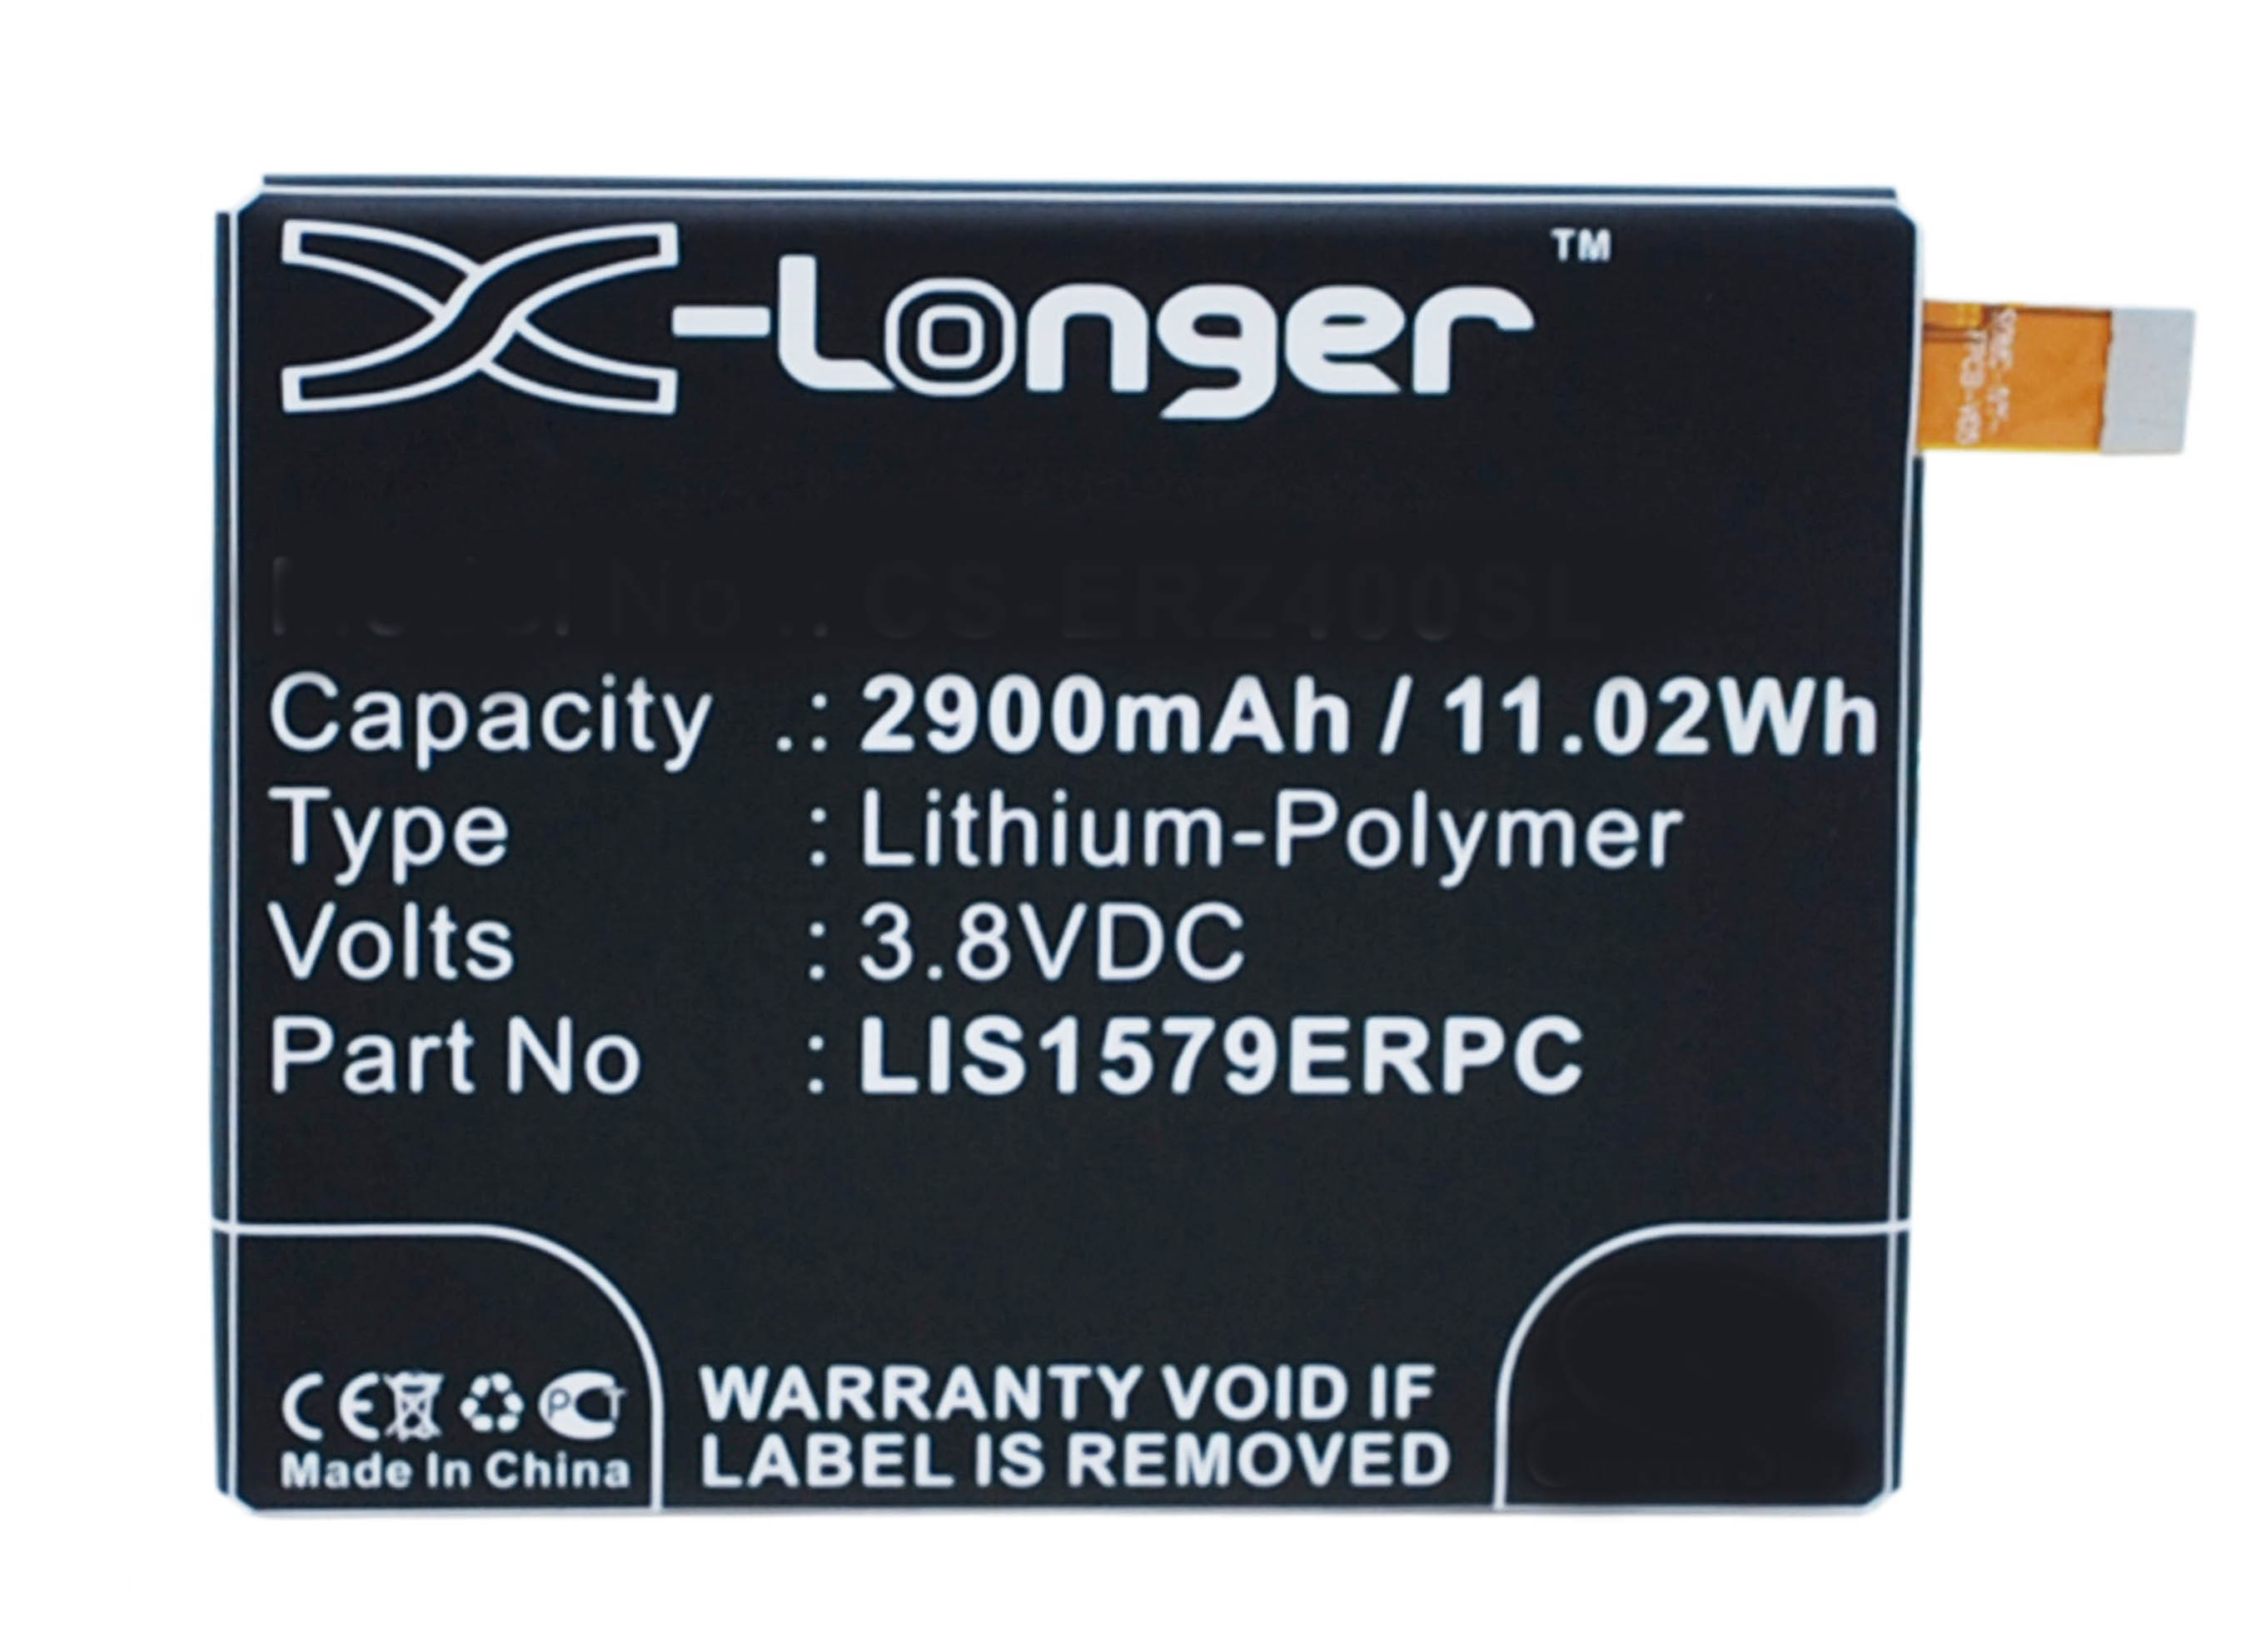 Synergy Digital Battery Compatible With Sony Ericsson AGPB015-A001 Cellphone Battery - (Li-Pol, 3.8V, 2900 mAh / 11.02Wh)